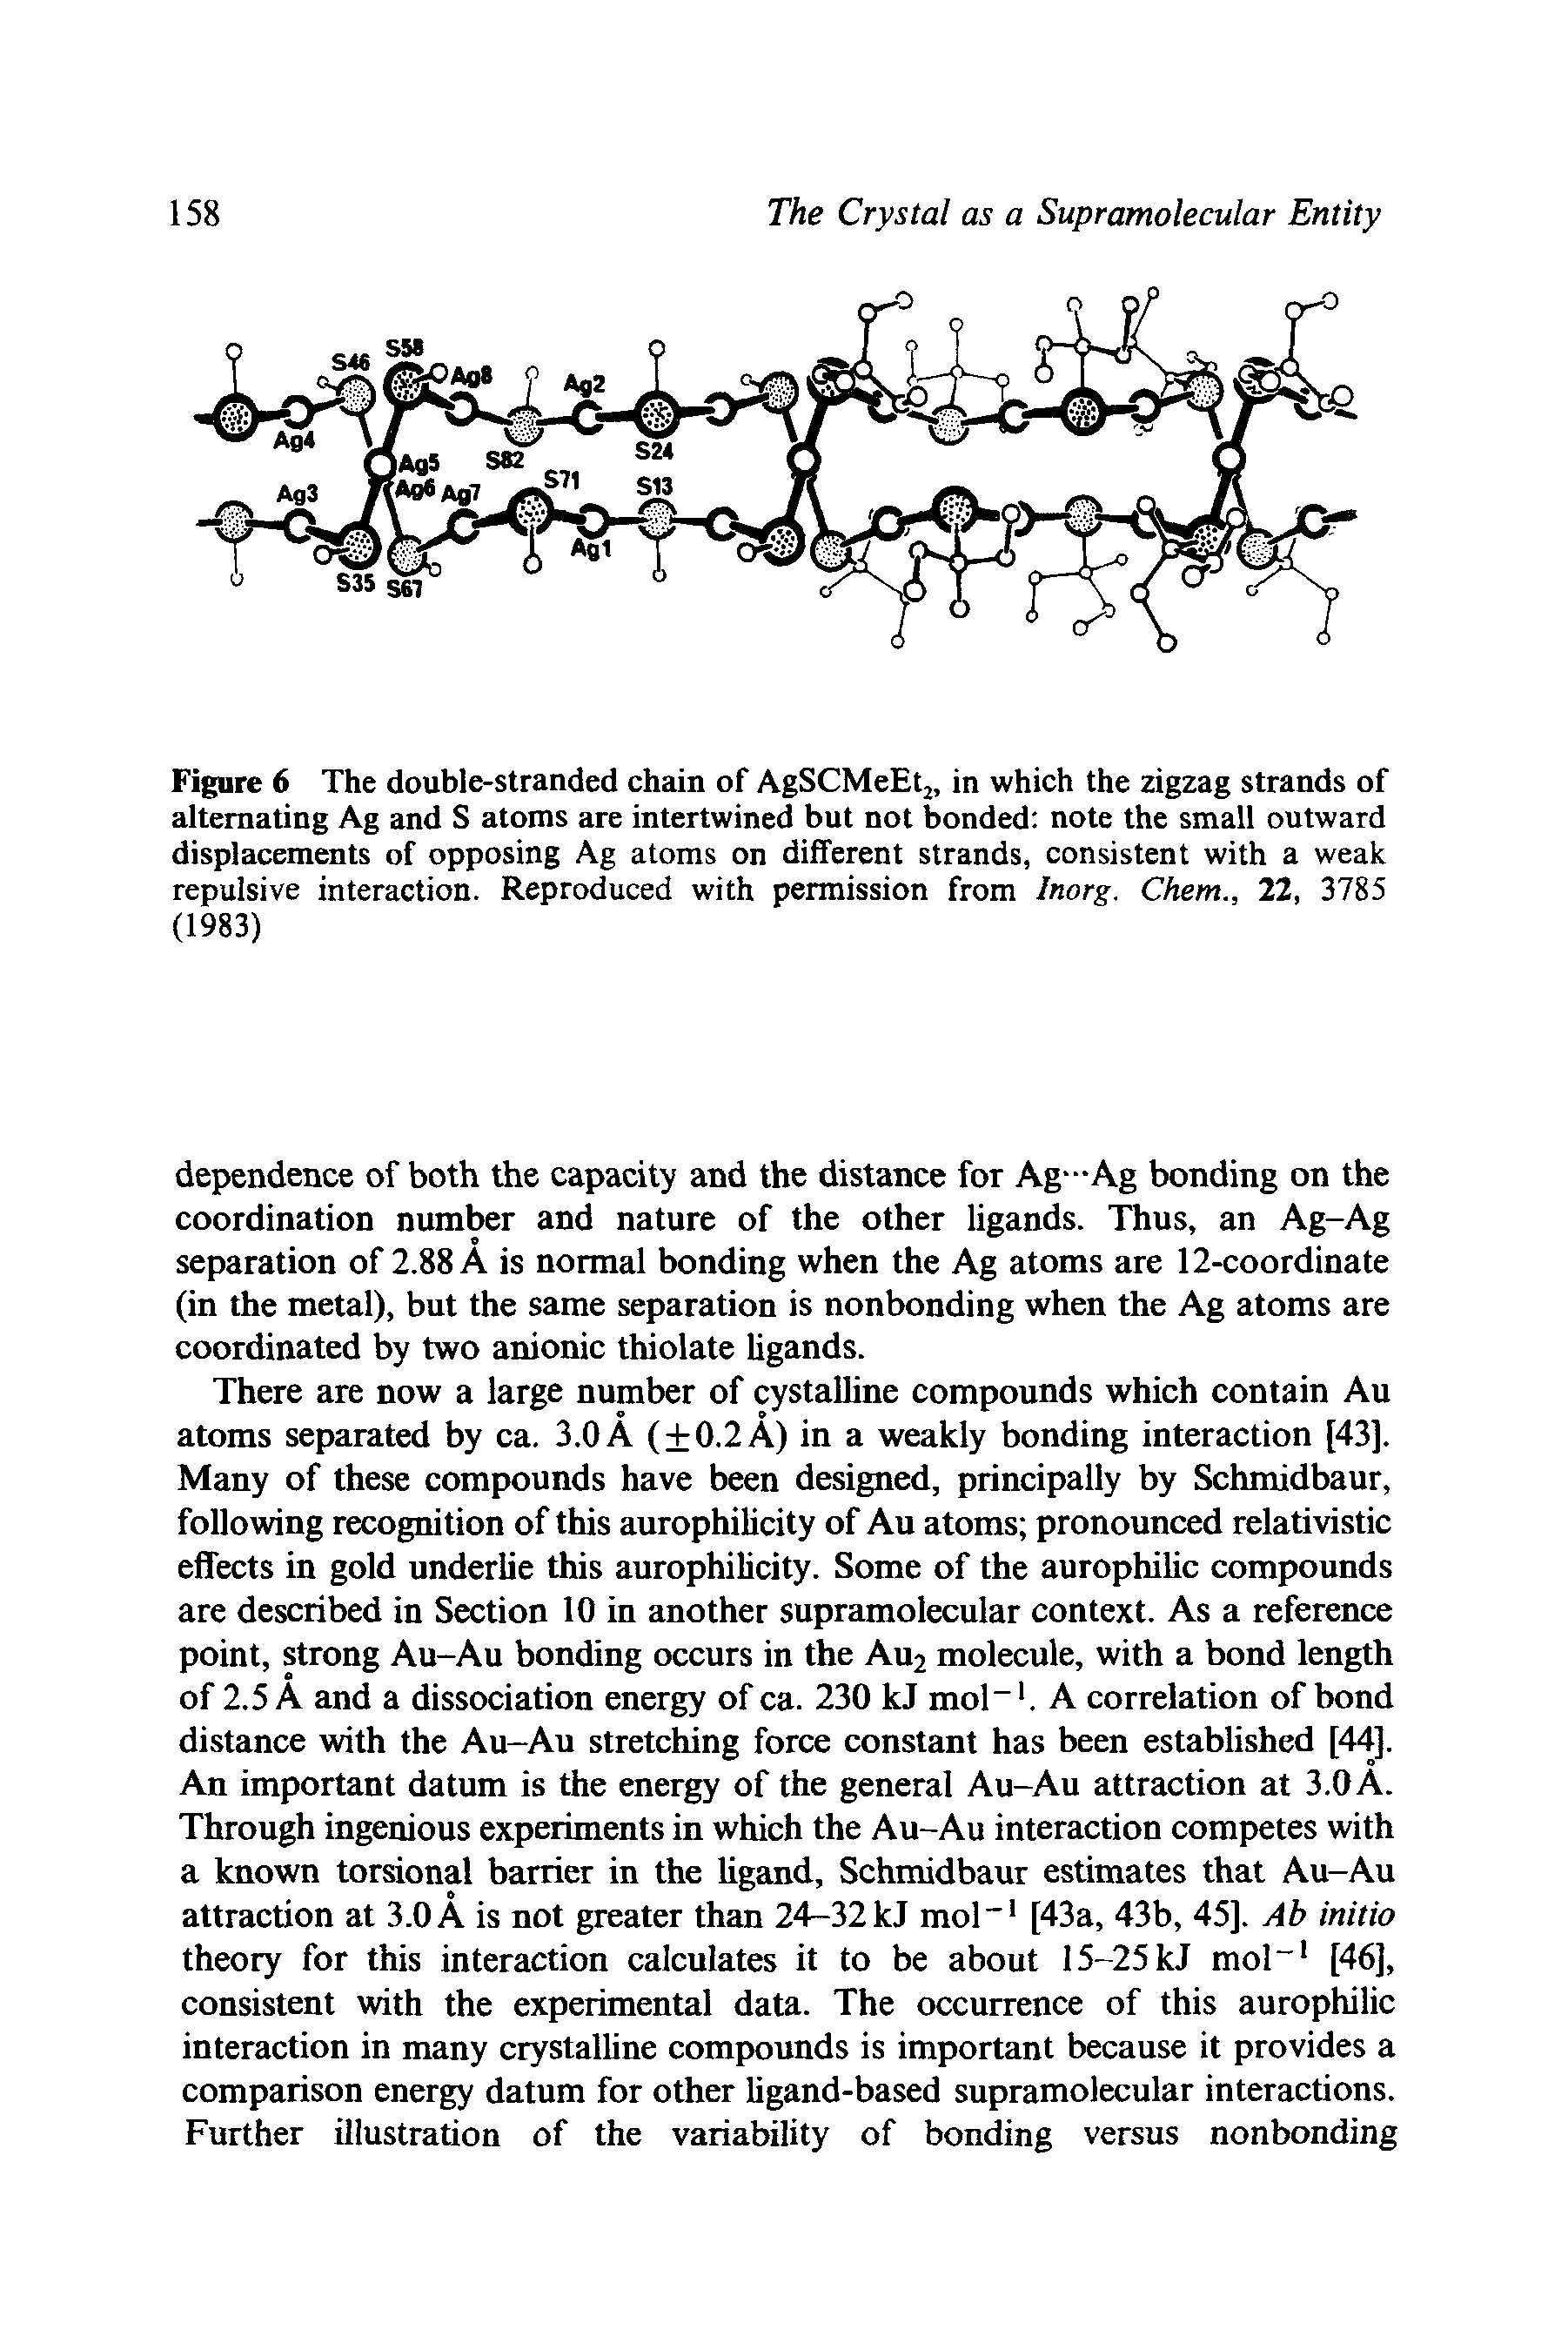 Figure 6 The double-stranded chain of AgSCMeEt, in which the zigzag strands of alternating Ag and S atoms are intertwined but not bonded note the small outward displacements of opposing Ag atoms on different strands, consistent with a weak repulsive interaction. Reproduced with permission from Inorg. Chem., 22, 3785 (1983)...